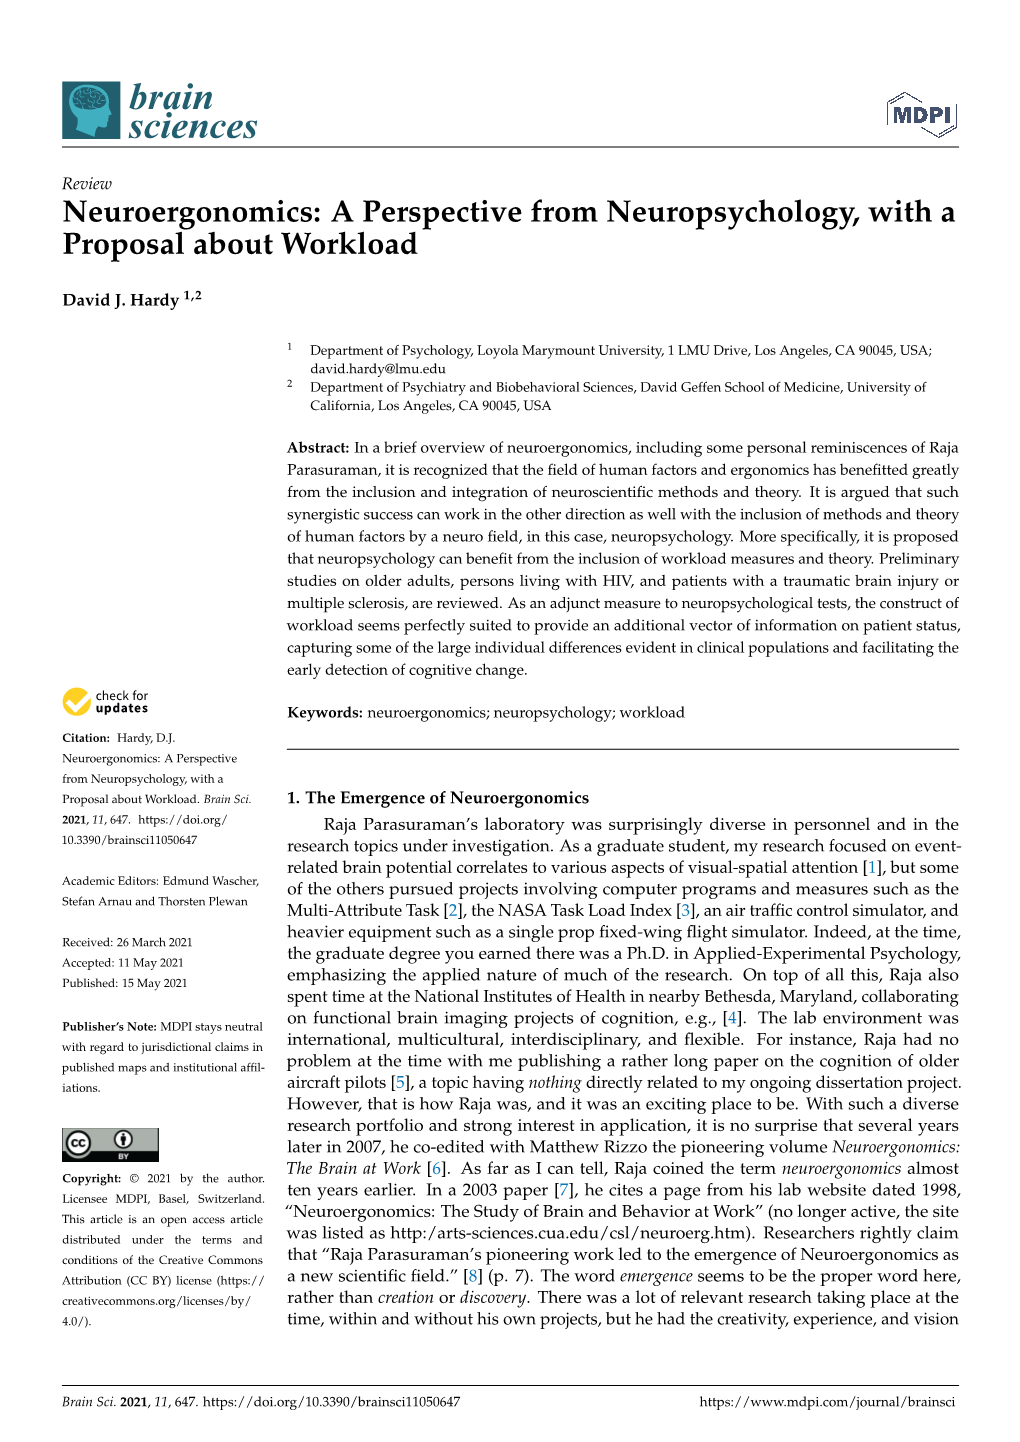 Neuroergonomics: a Perspective from Neuropsychology, with a Proposal About Workload